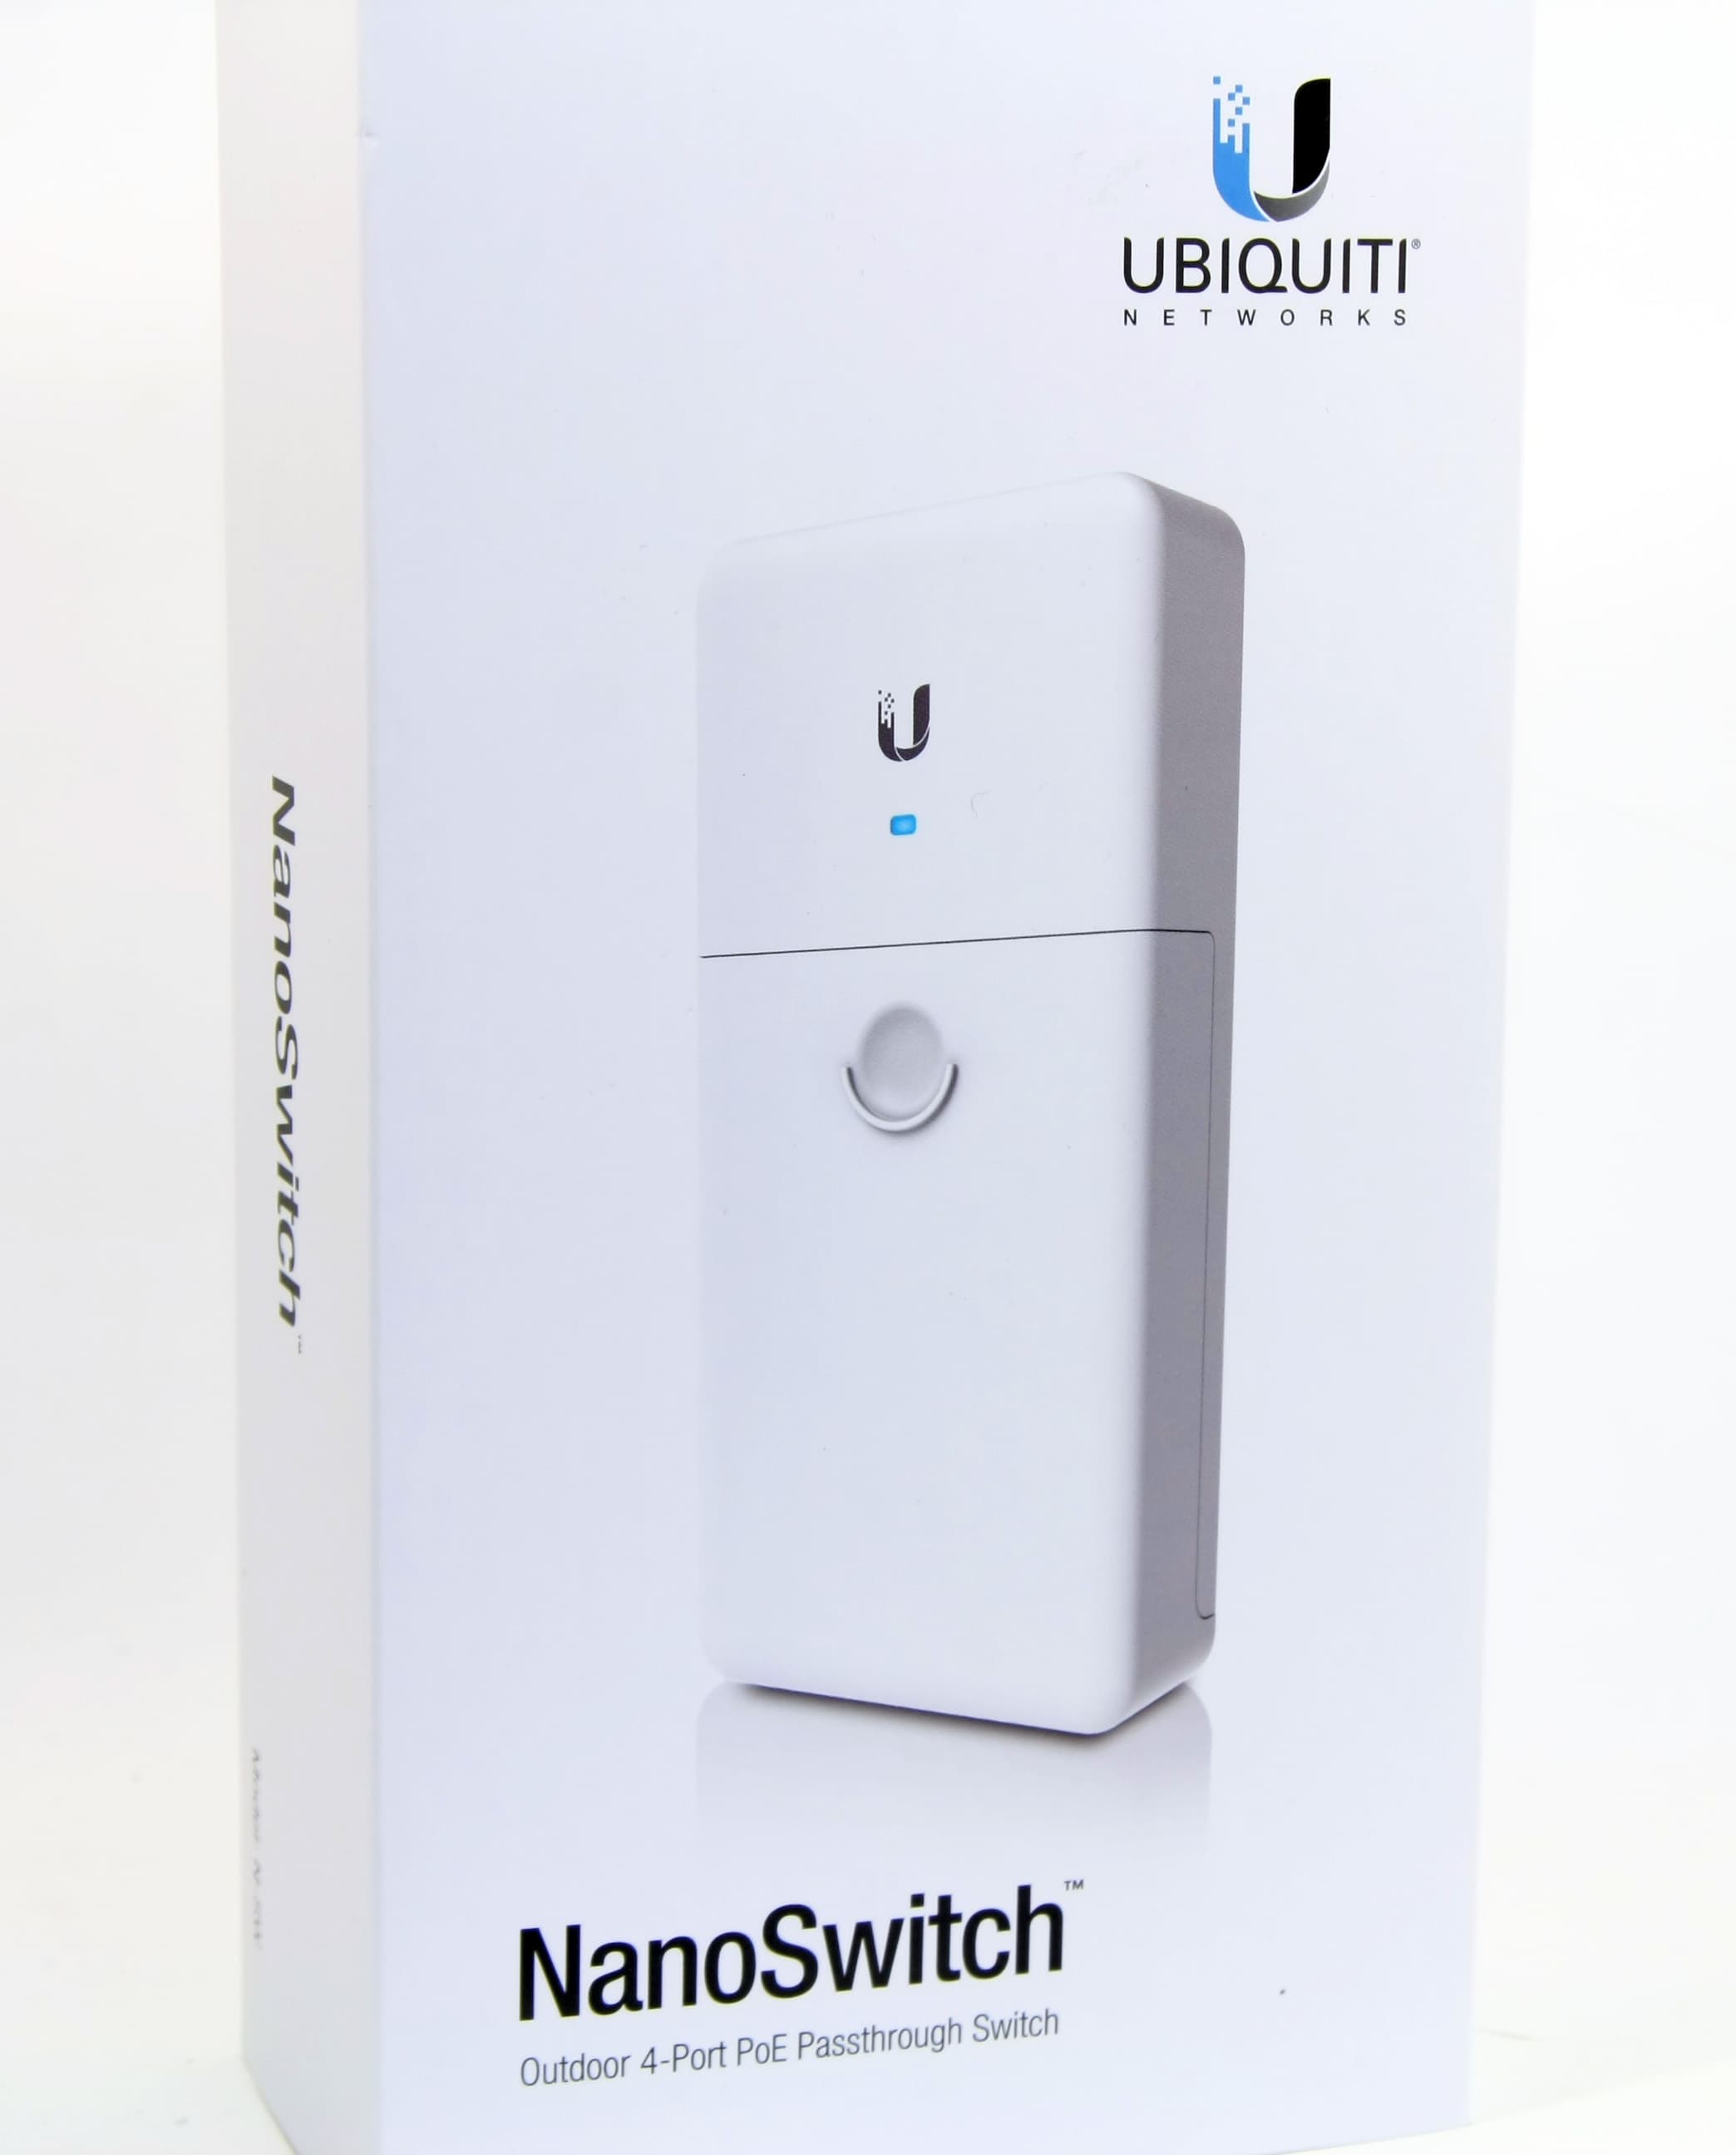 Ubiquiti NanoSwitch 4 Port Outdoor Gigabit Switch with PoE Passthrough